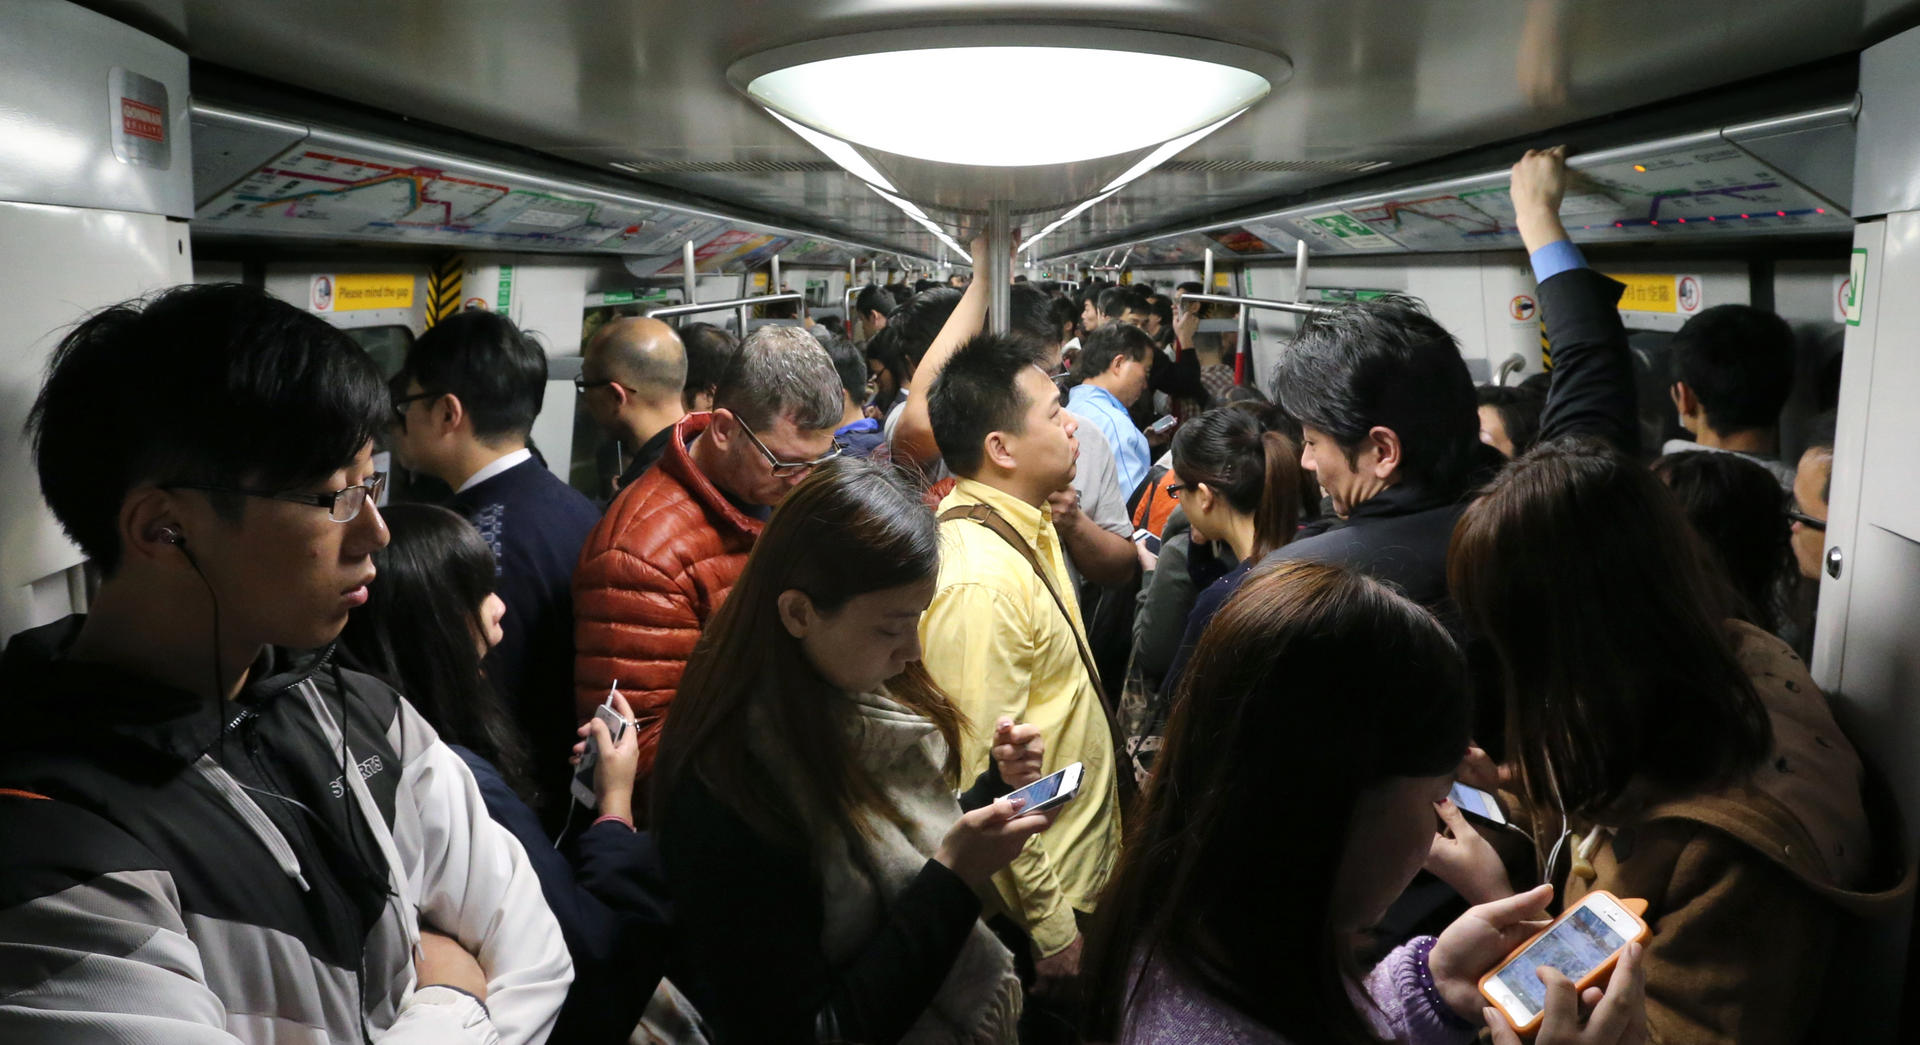 MTR enjoyed 3 per cent growth in passenger numbers last year, with chief Jay Walder voicing optimism. Photos: K. Y. Cheng, David Wong